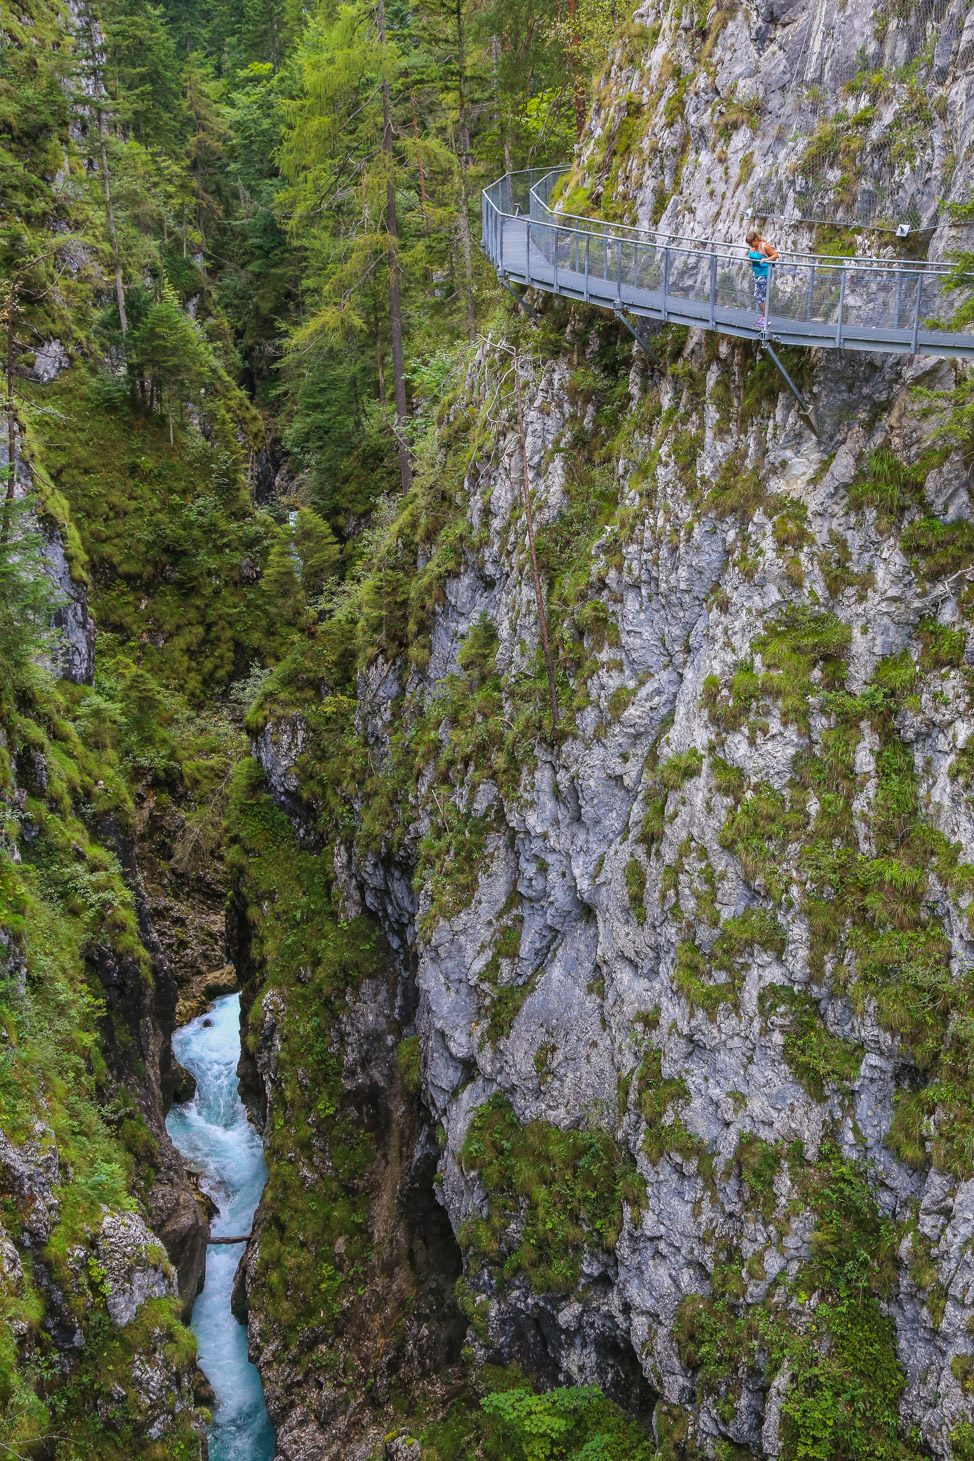 Road Tripping through the Bavarian Alps: From Mittenwald to the Leutasch Gorge